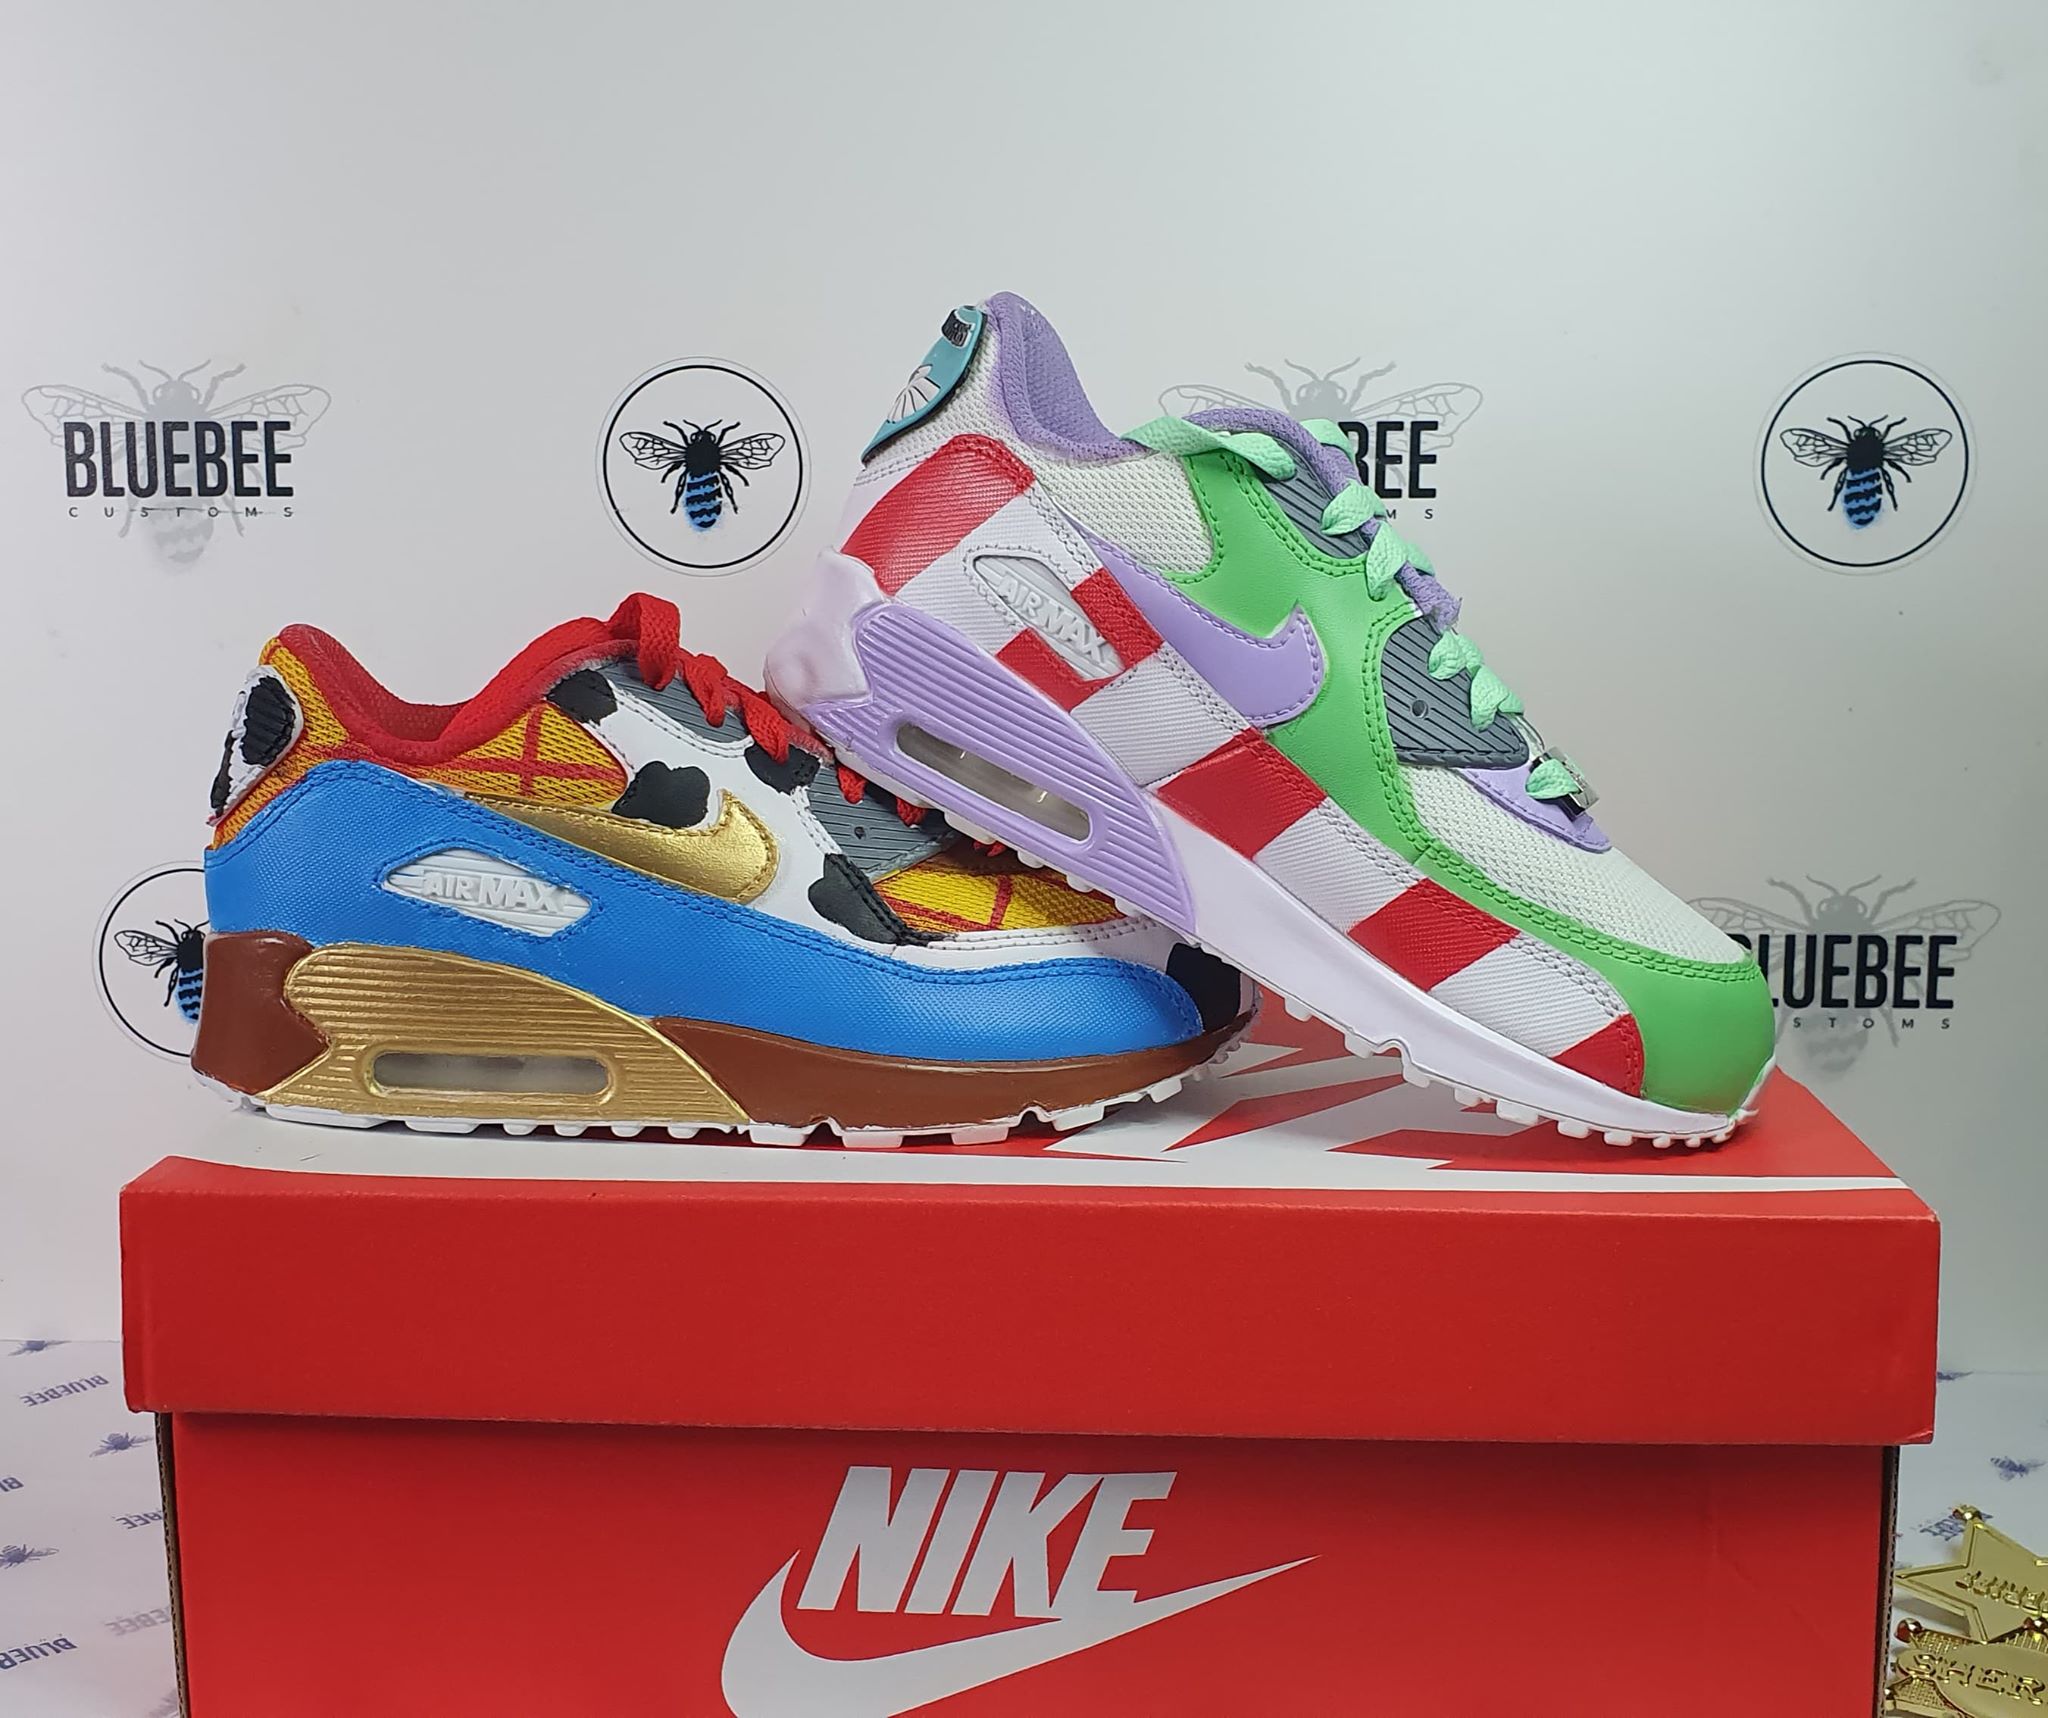 woody and buzz nike air max